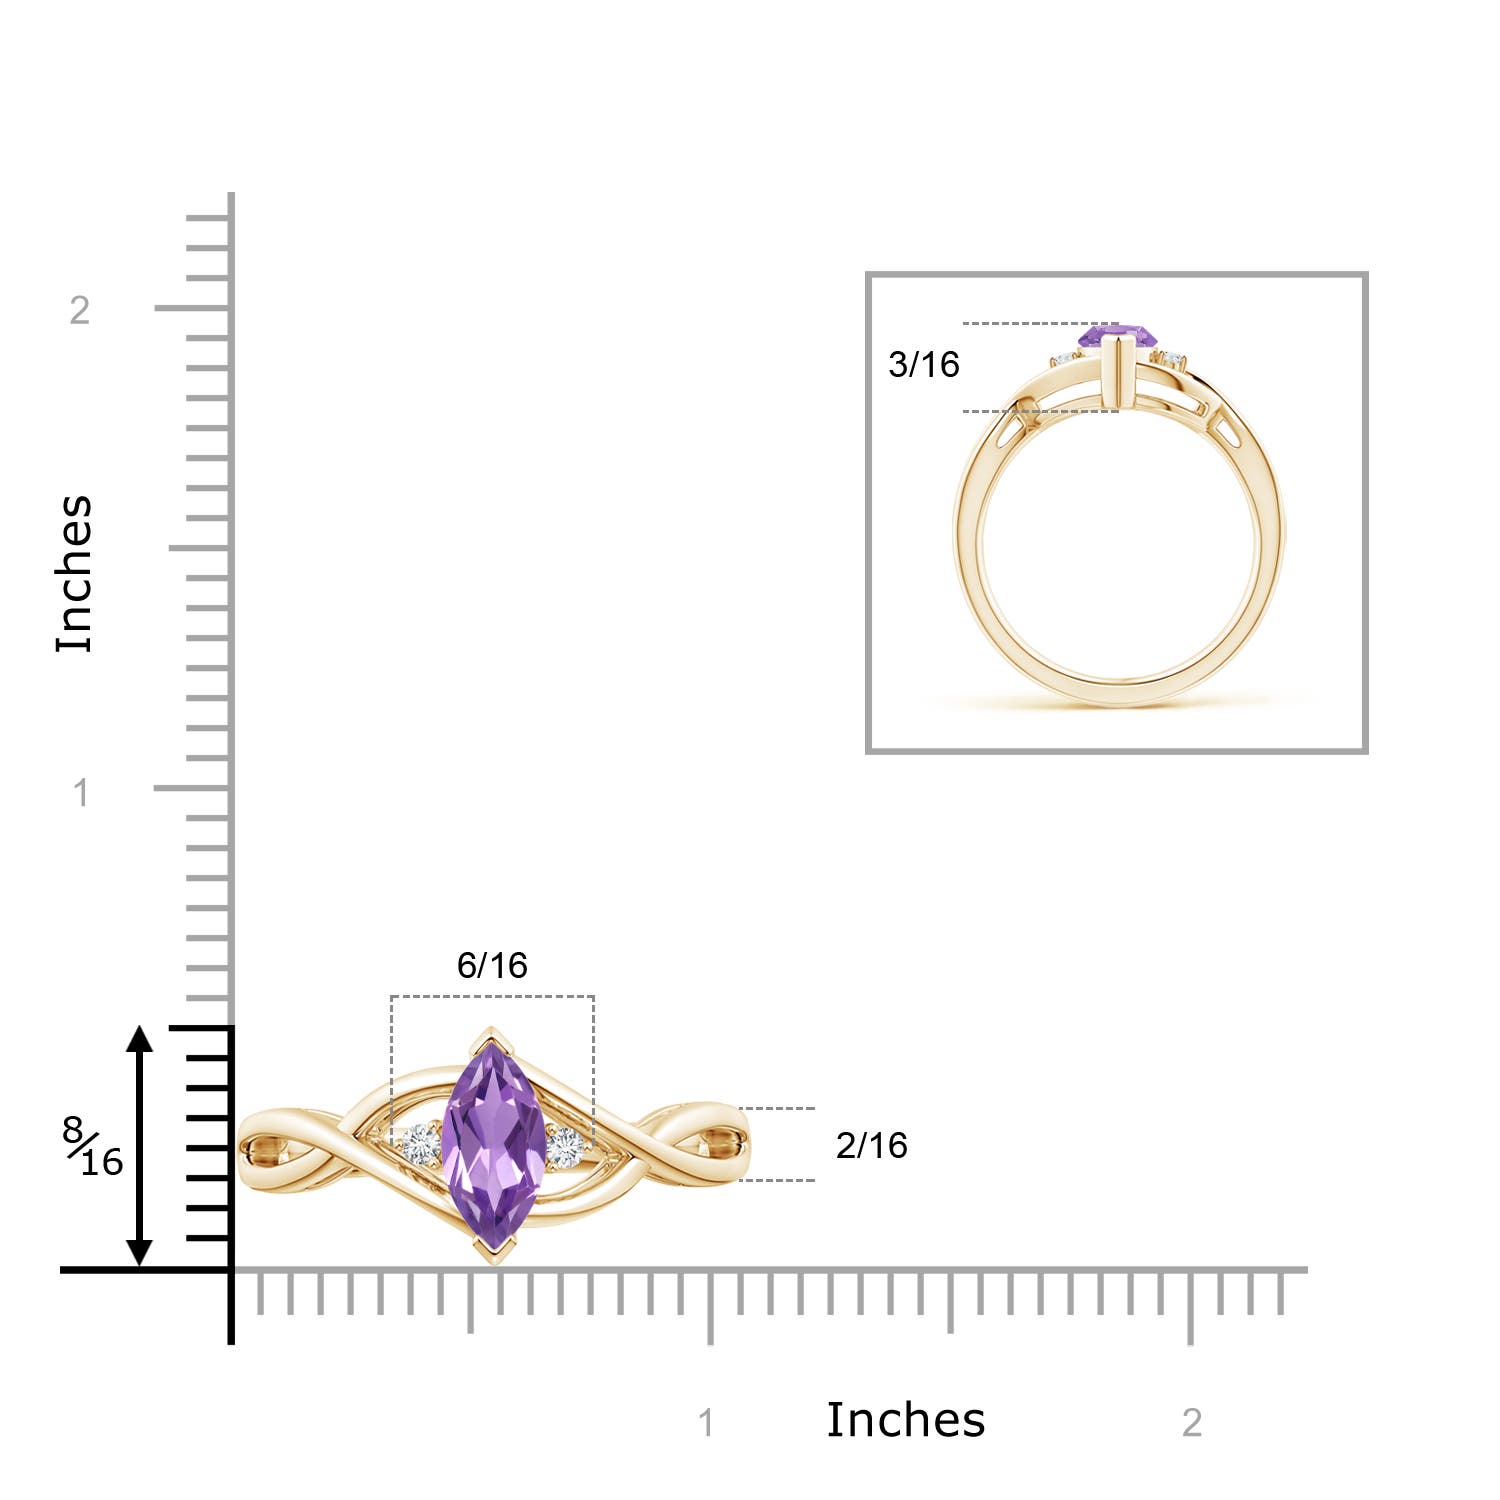 A - Amethyst / 0.98 CT / 14 KT Yellow Gold